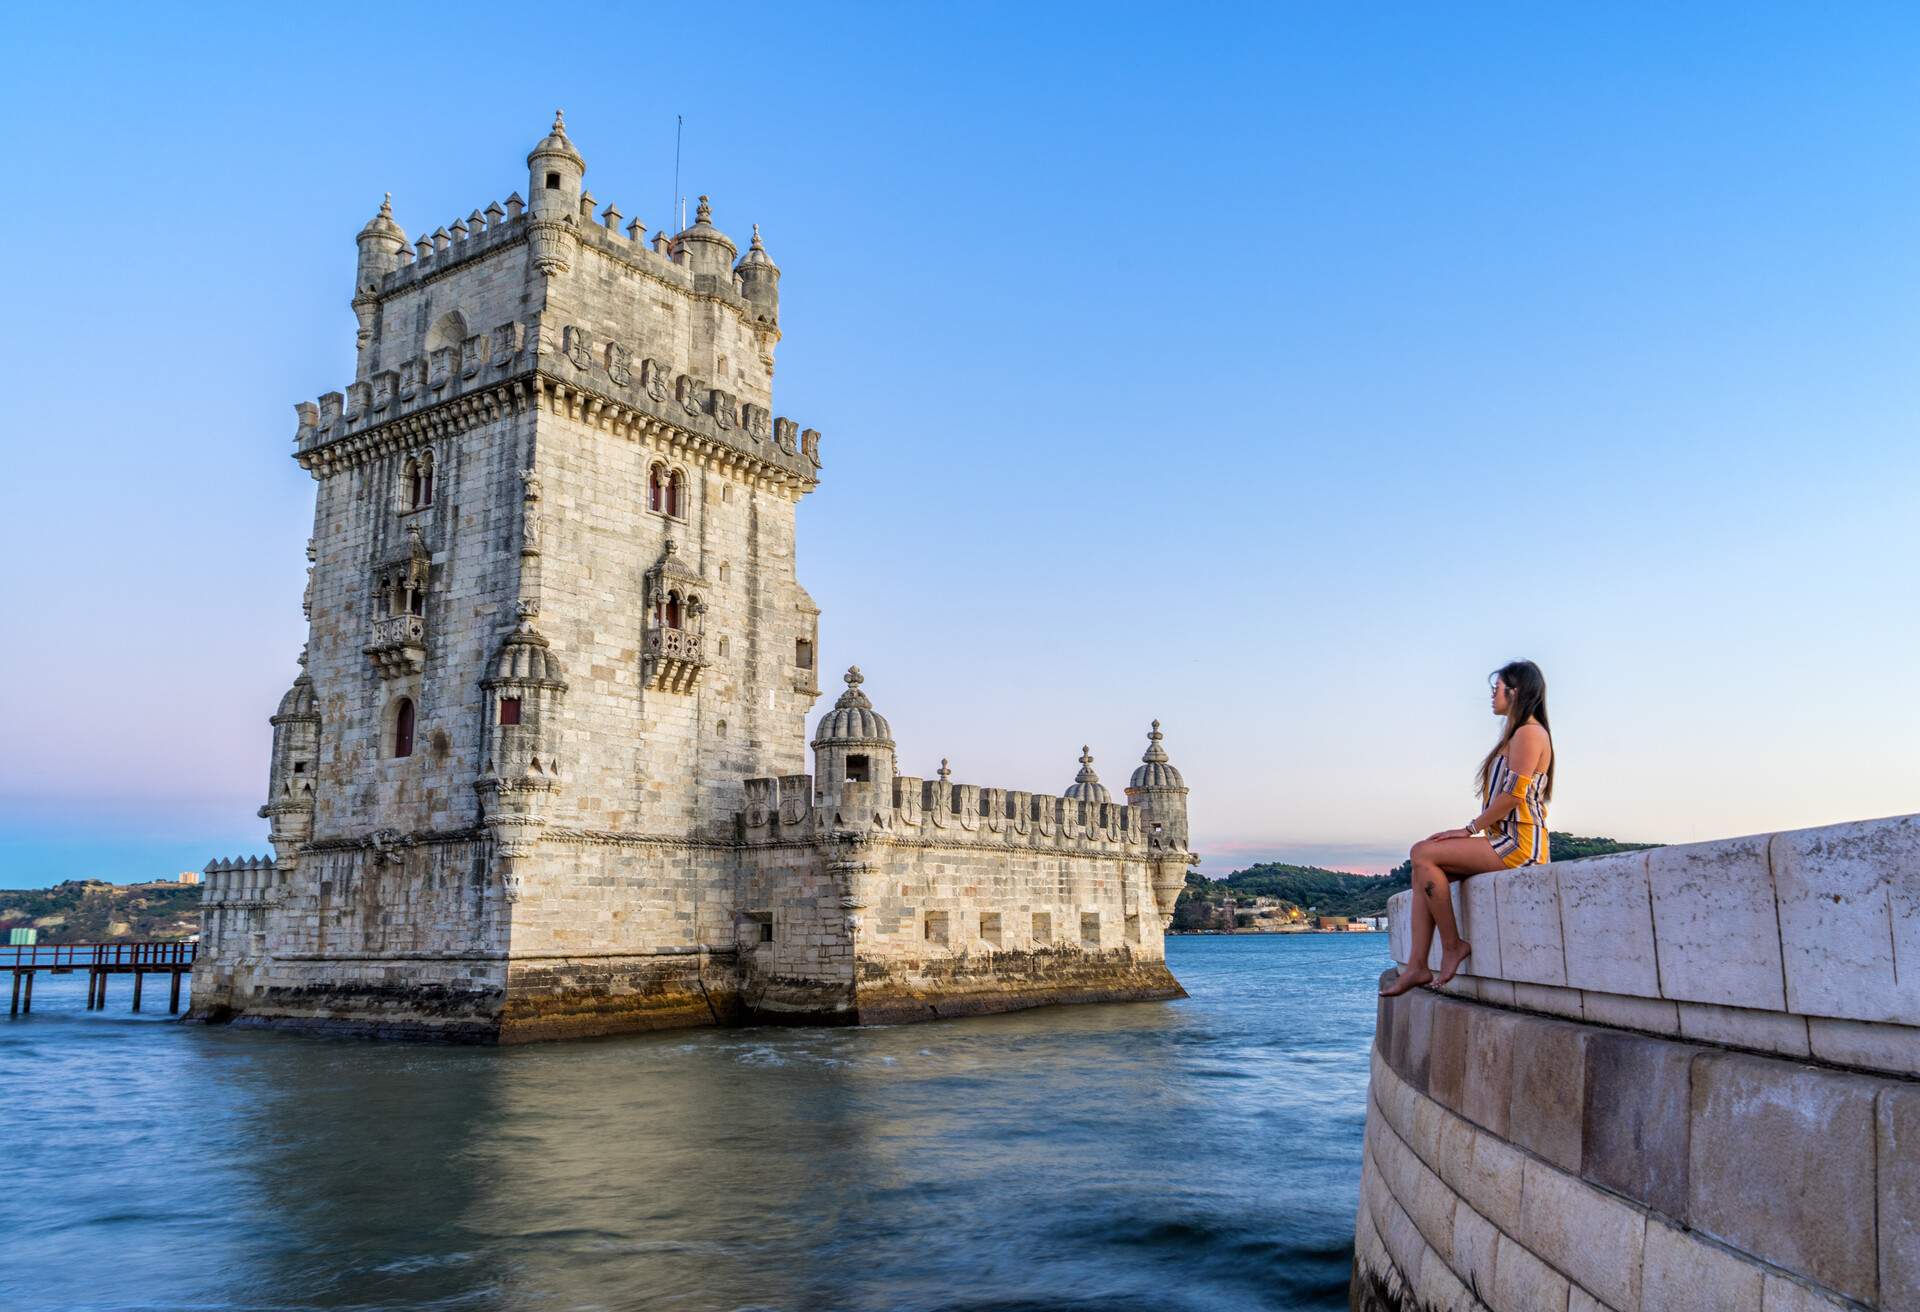 A woman sitting on a stone wall across from the Belém Tower.